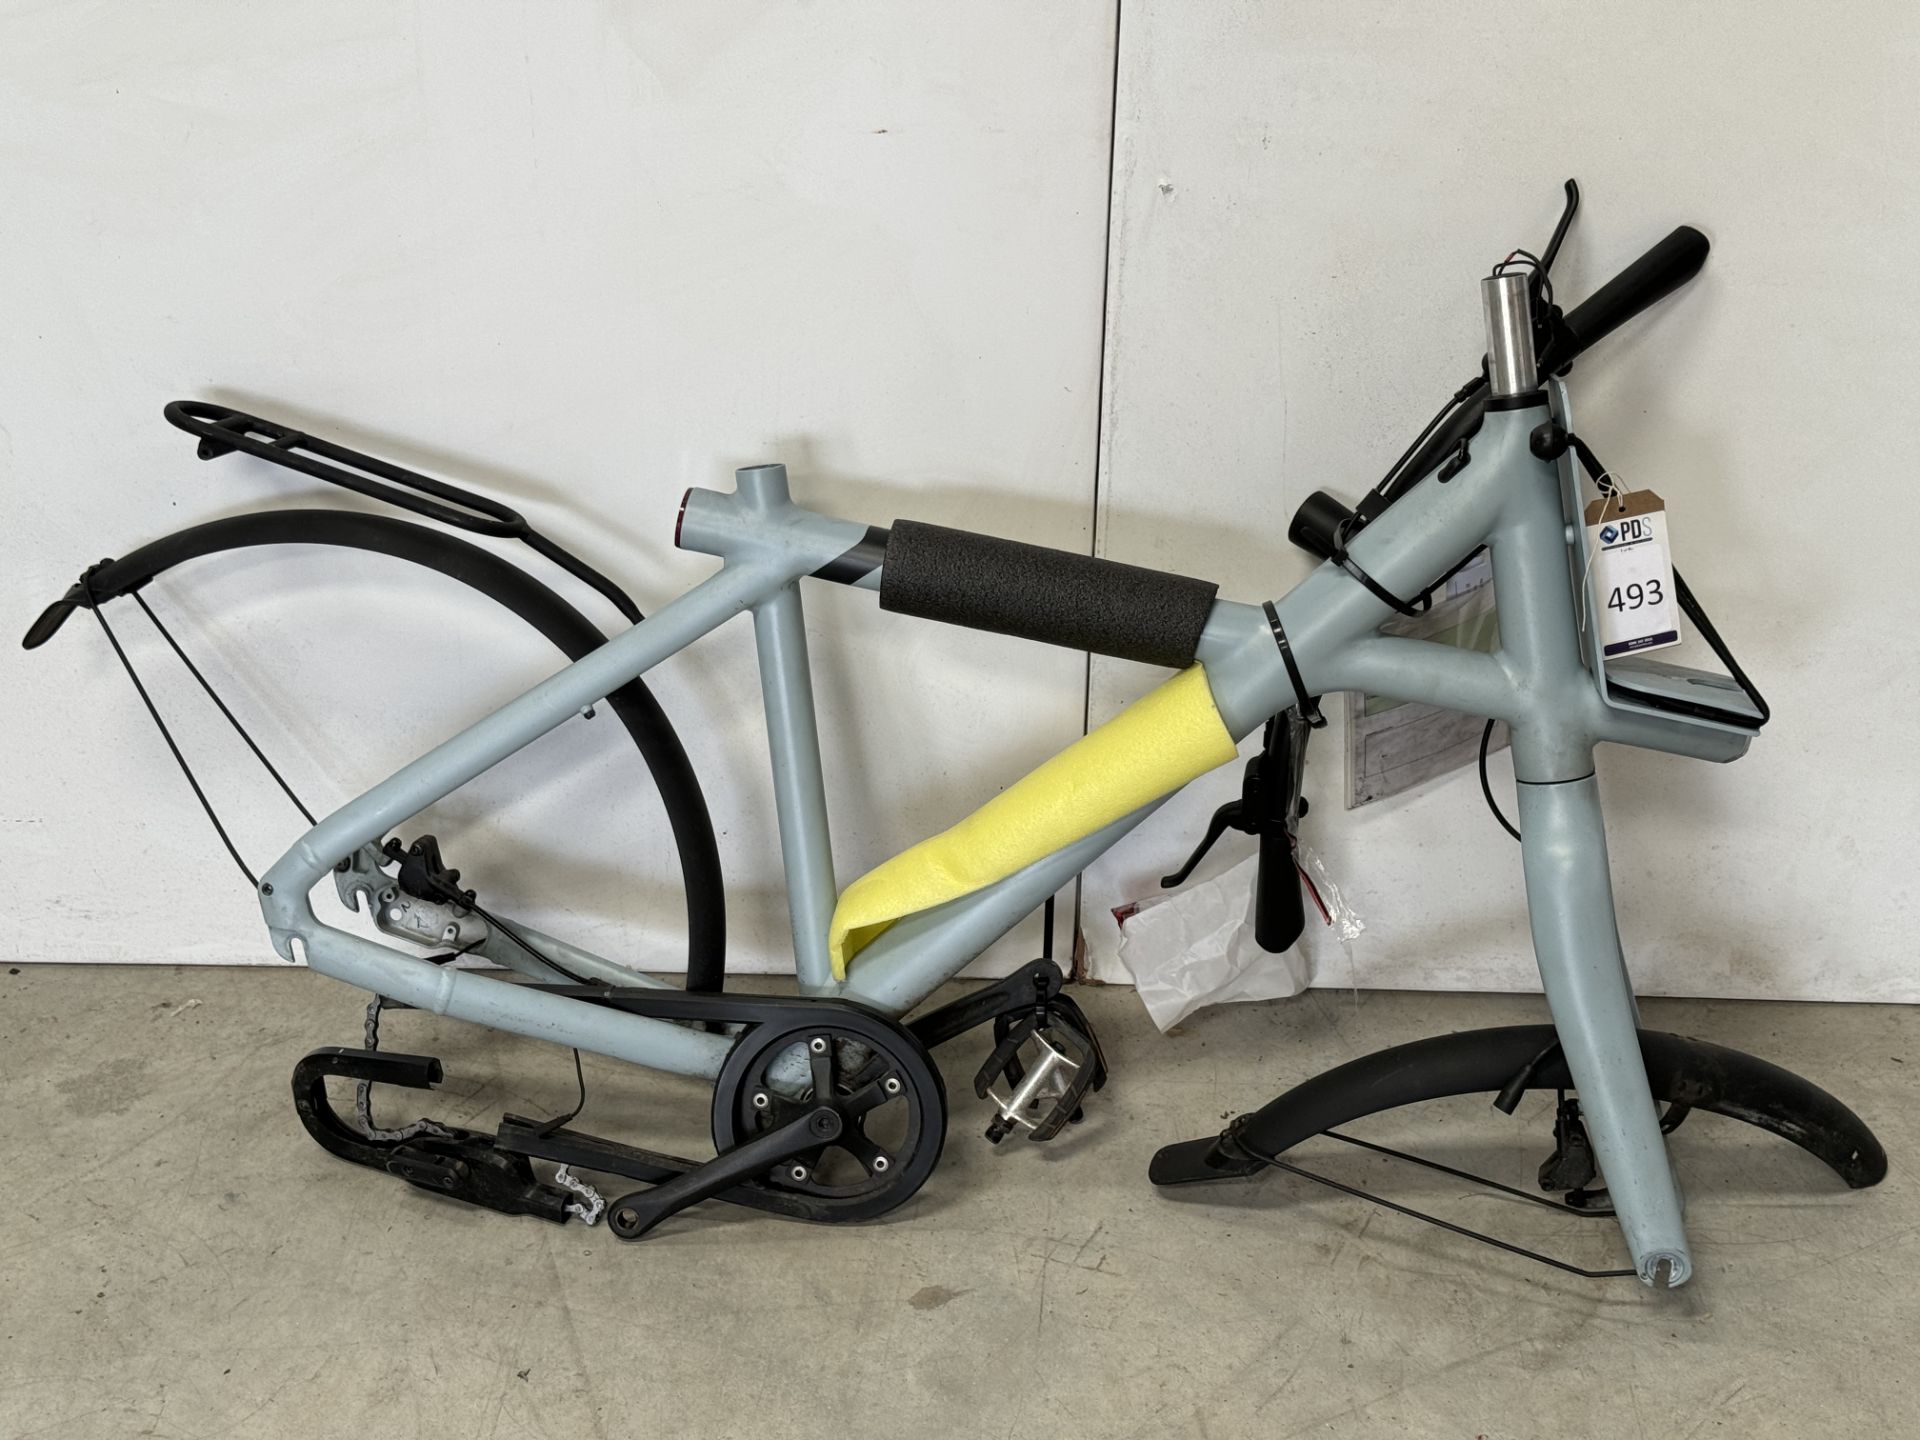 VanMoof X3 Electric Bike, Frame Number ASY2006166 (NOT ROADWORTHY - FOR SPARES ONLY) (No codes